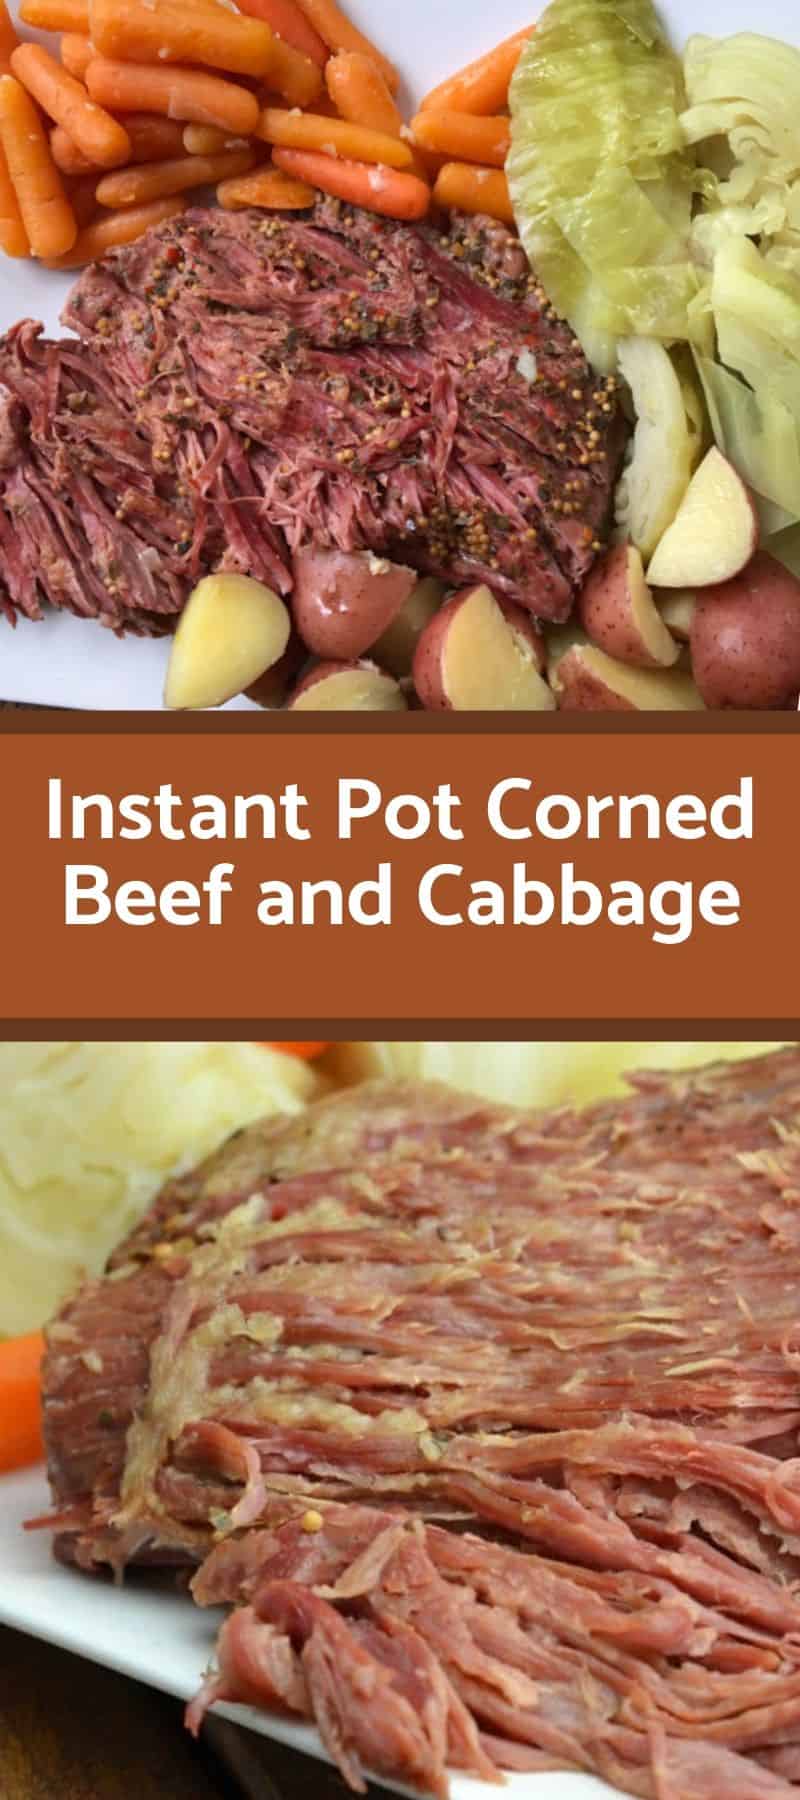 Instant Pot Corned Beef and Cabbage 3